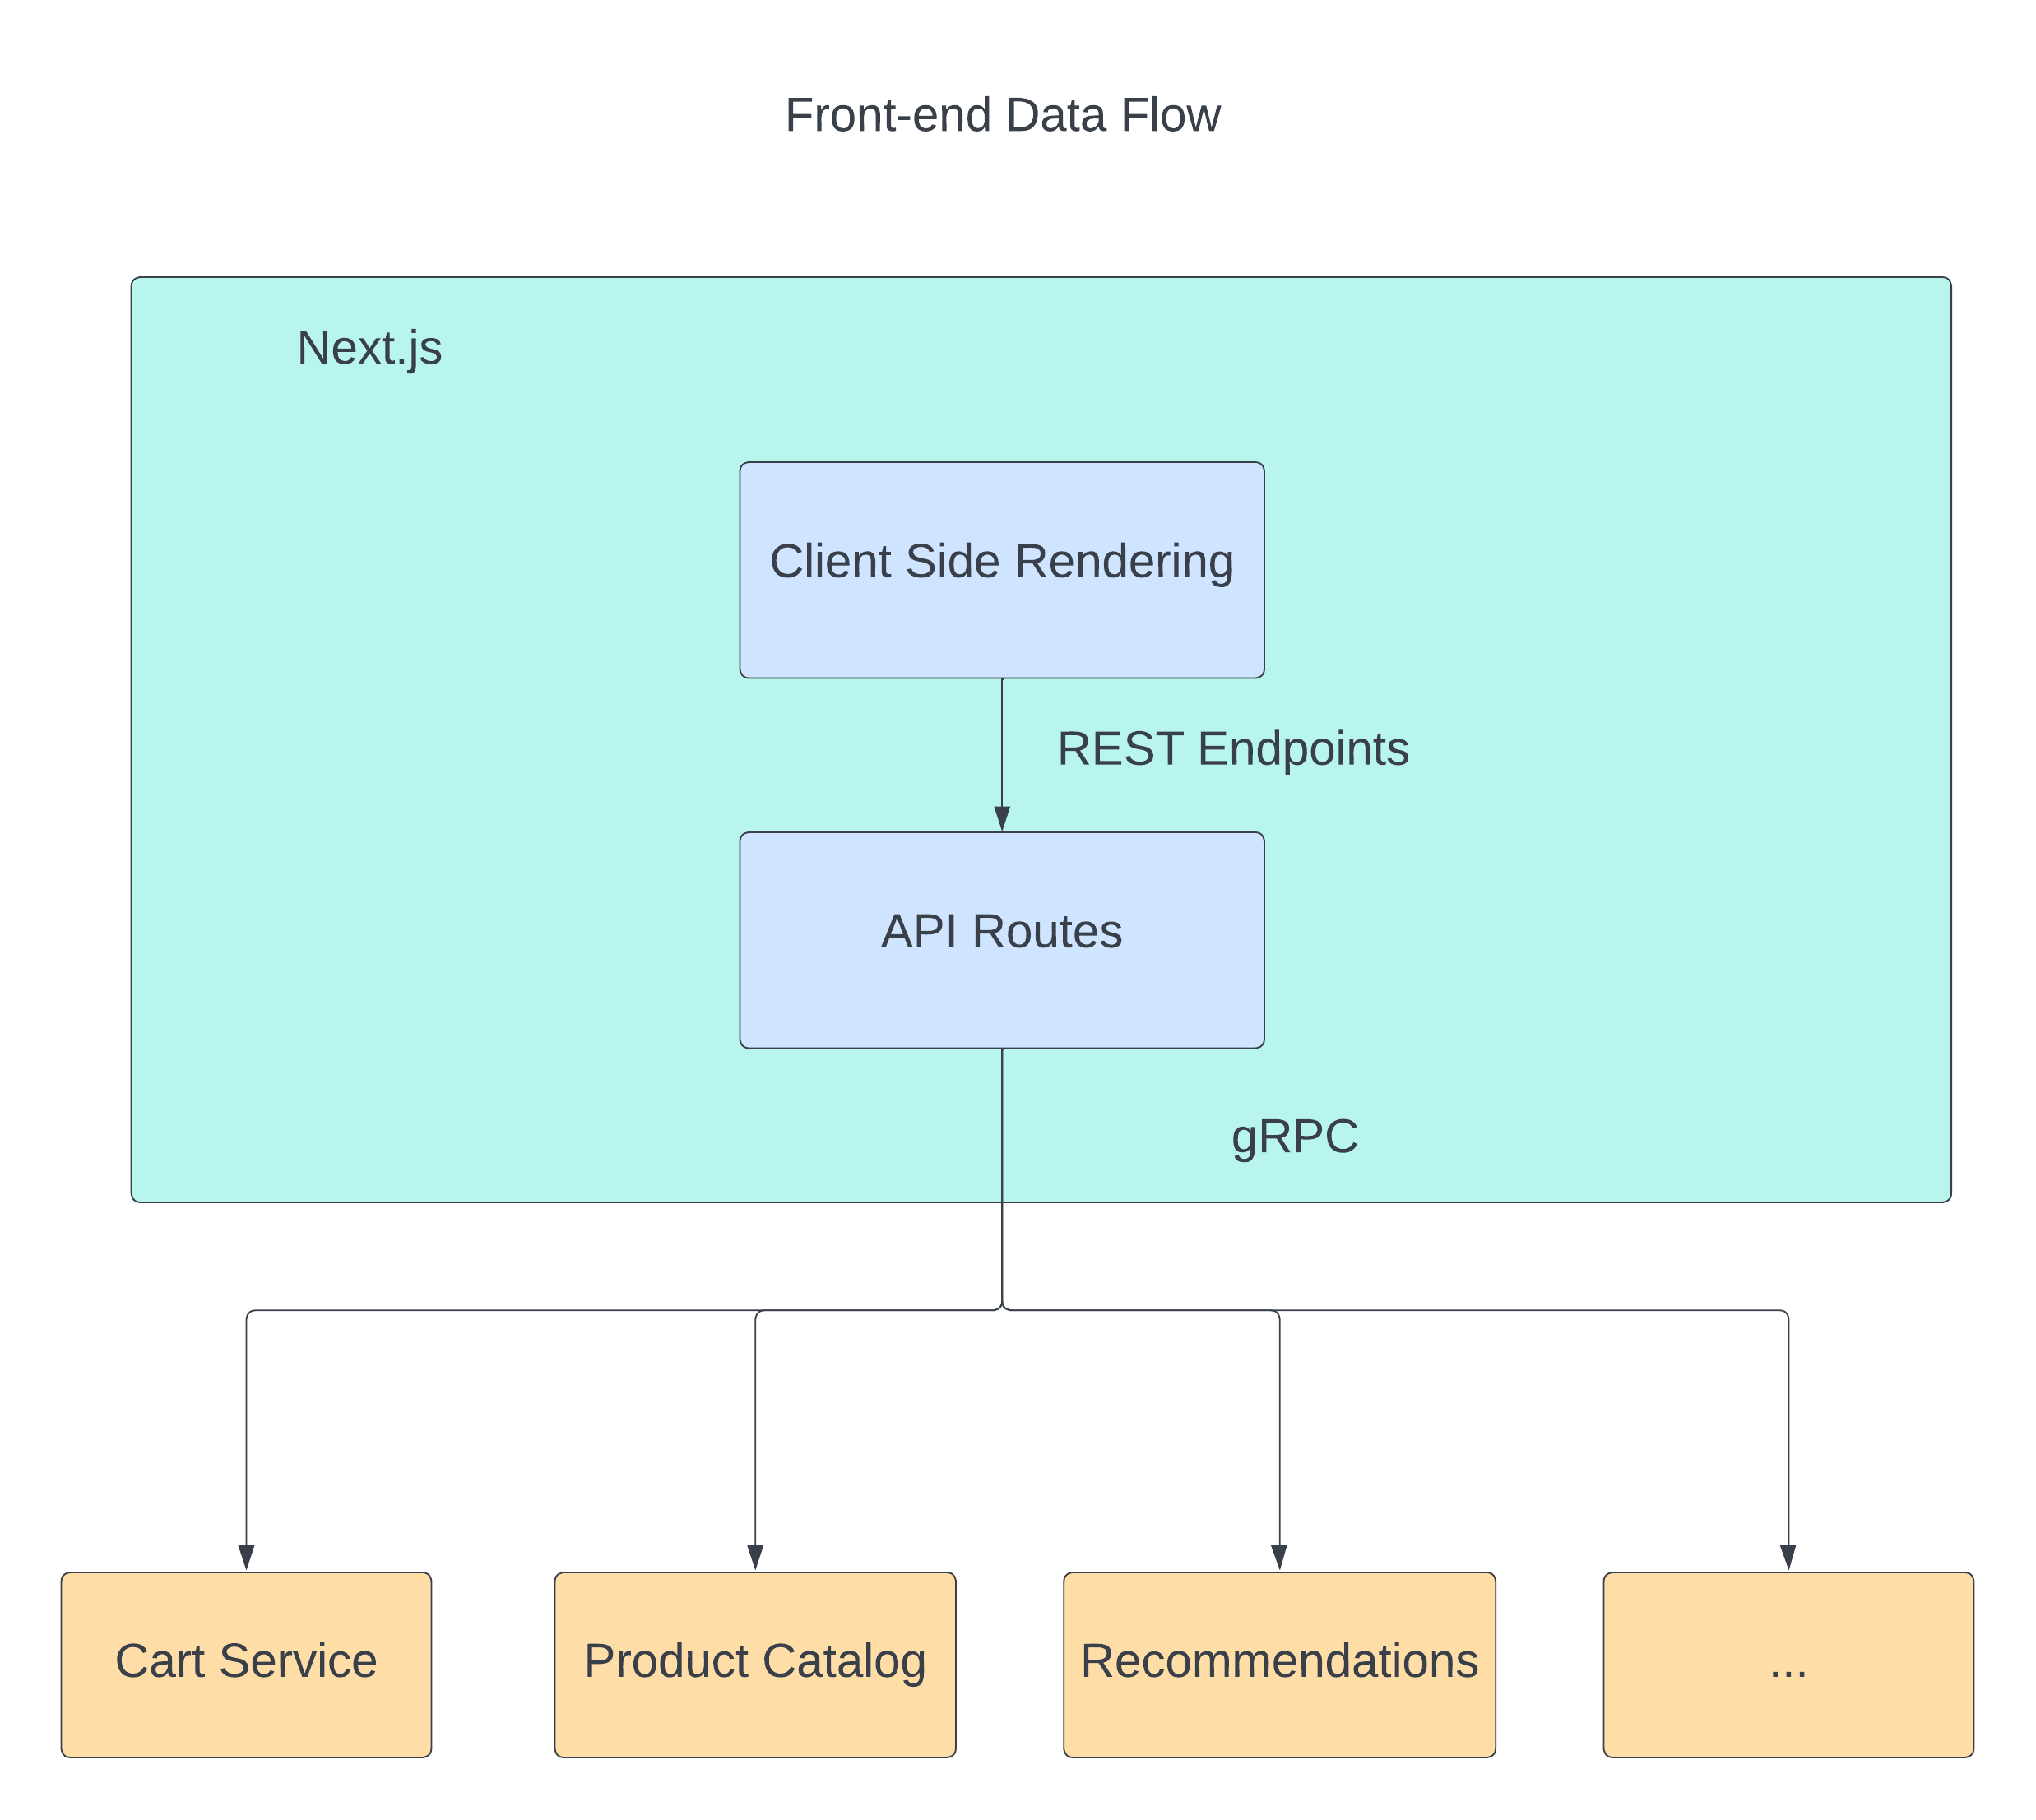 New Front-end Data Flow